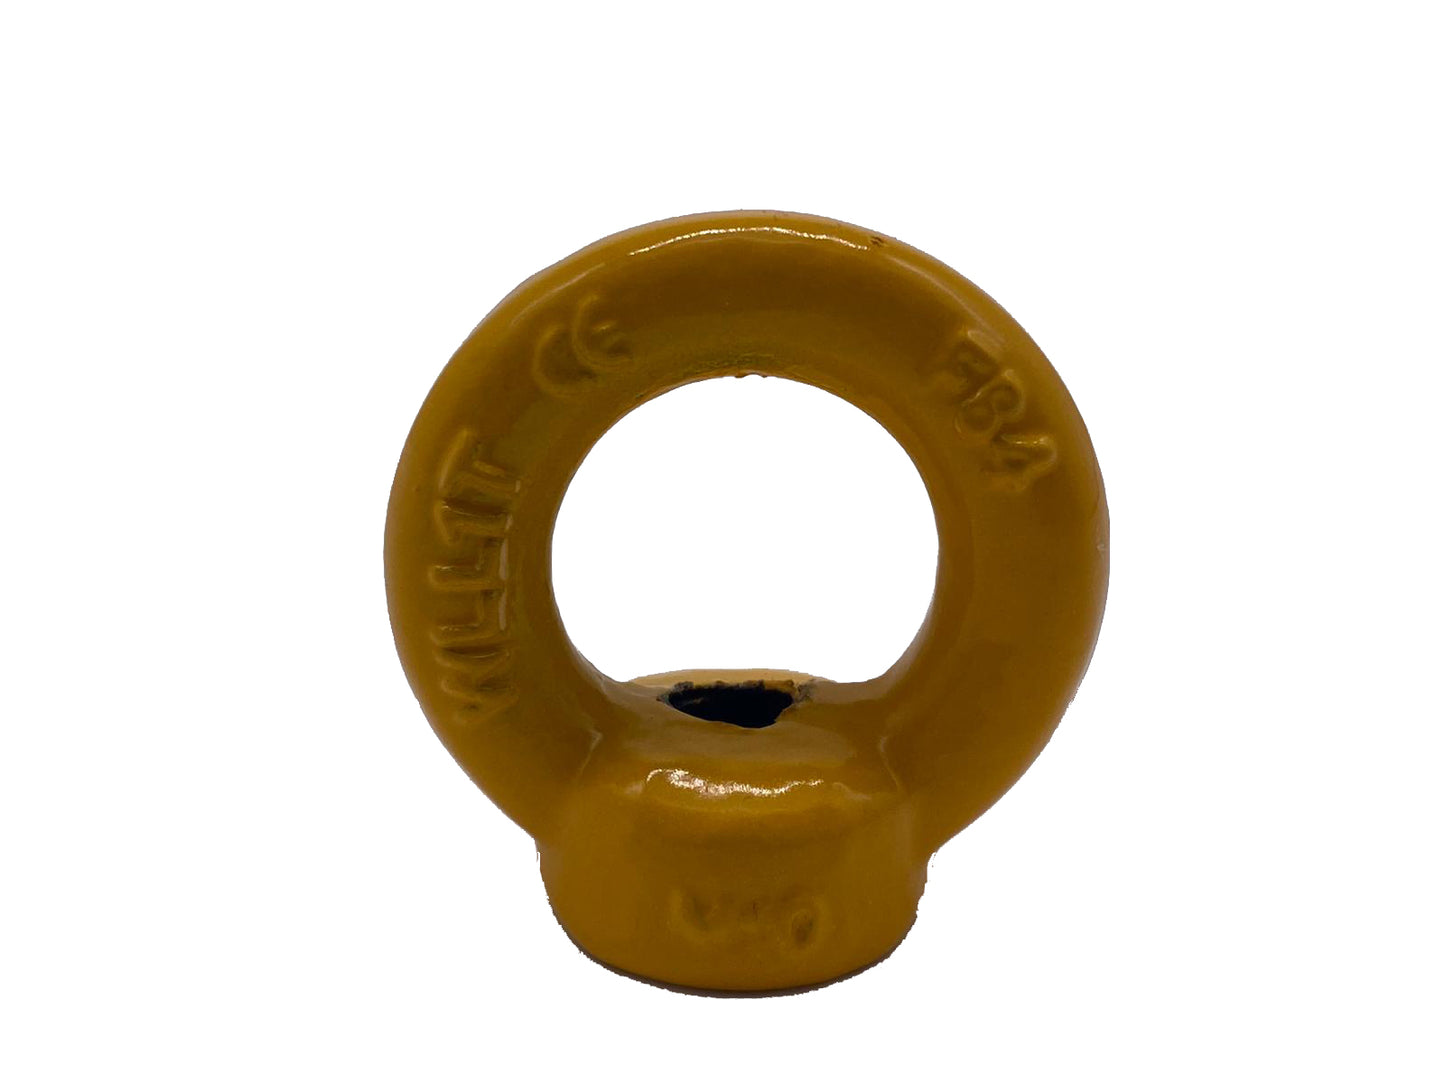 Grade 80 High Tensile Lifting Eyenut (285-15) available from RiggingUK on a next day delivery 